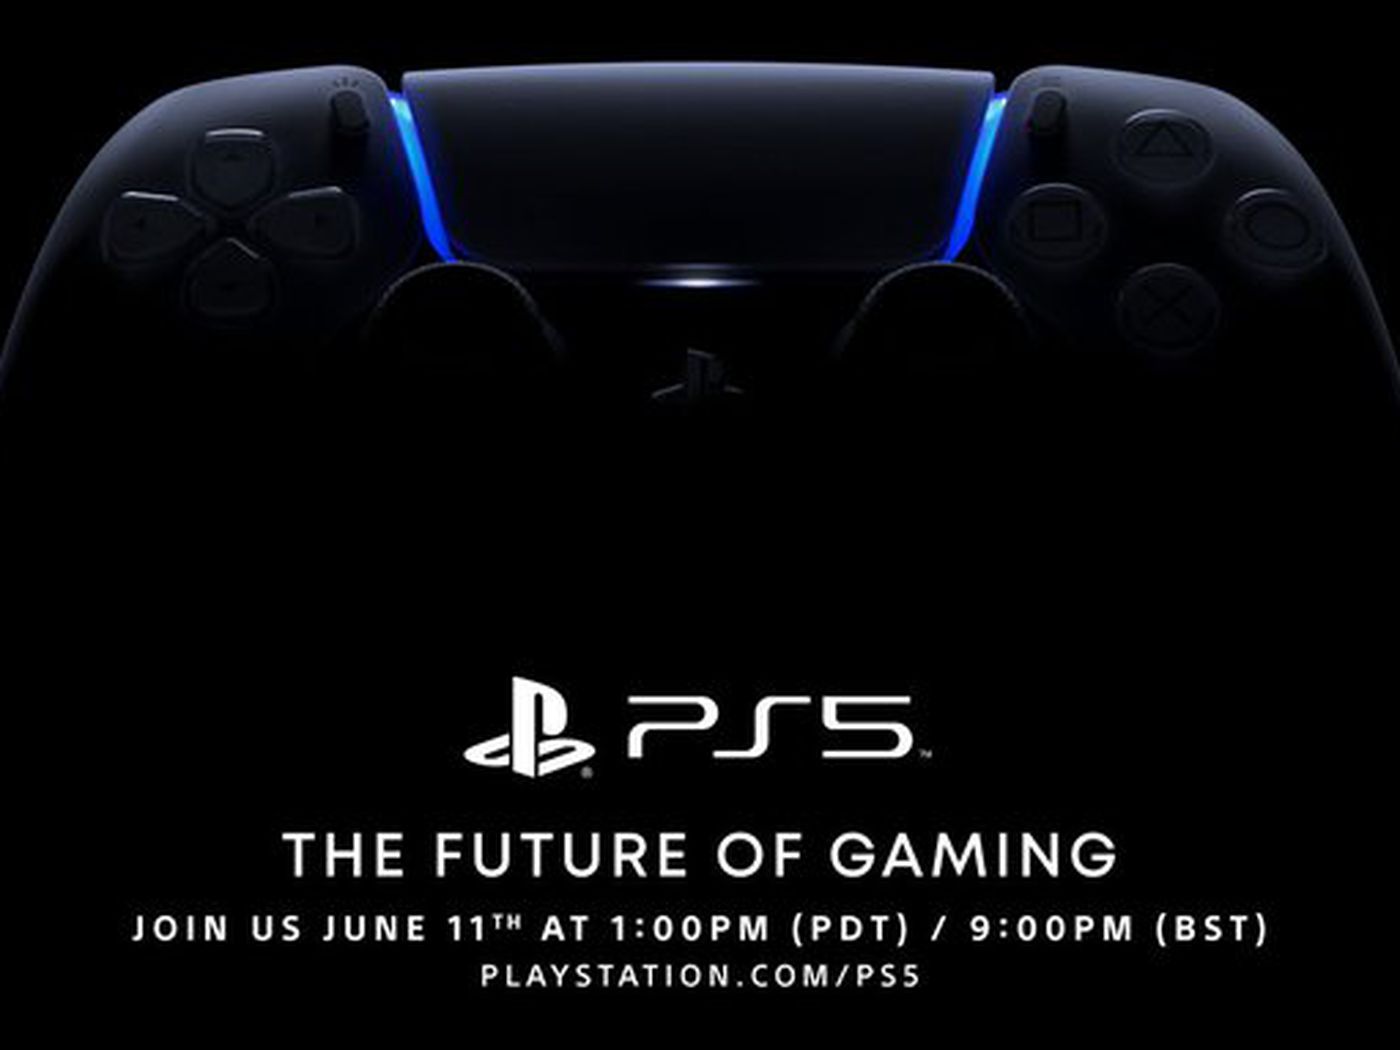 Sony's PS5 event rescheduled - The Verge